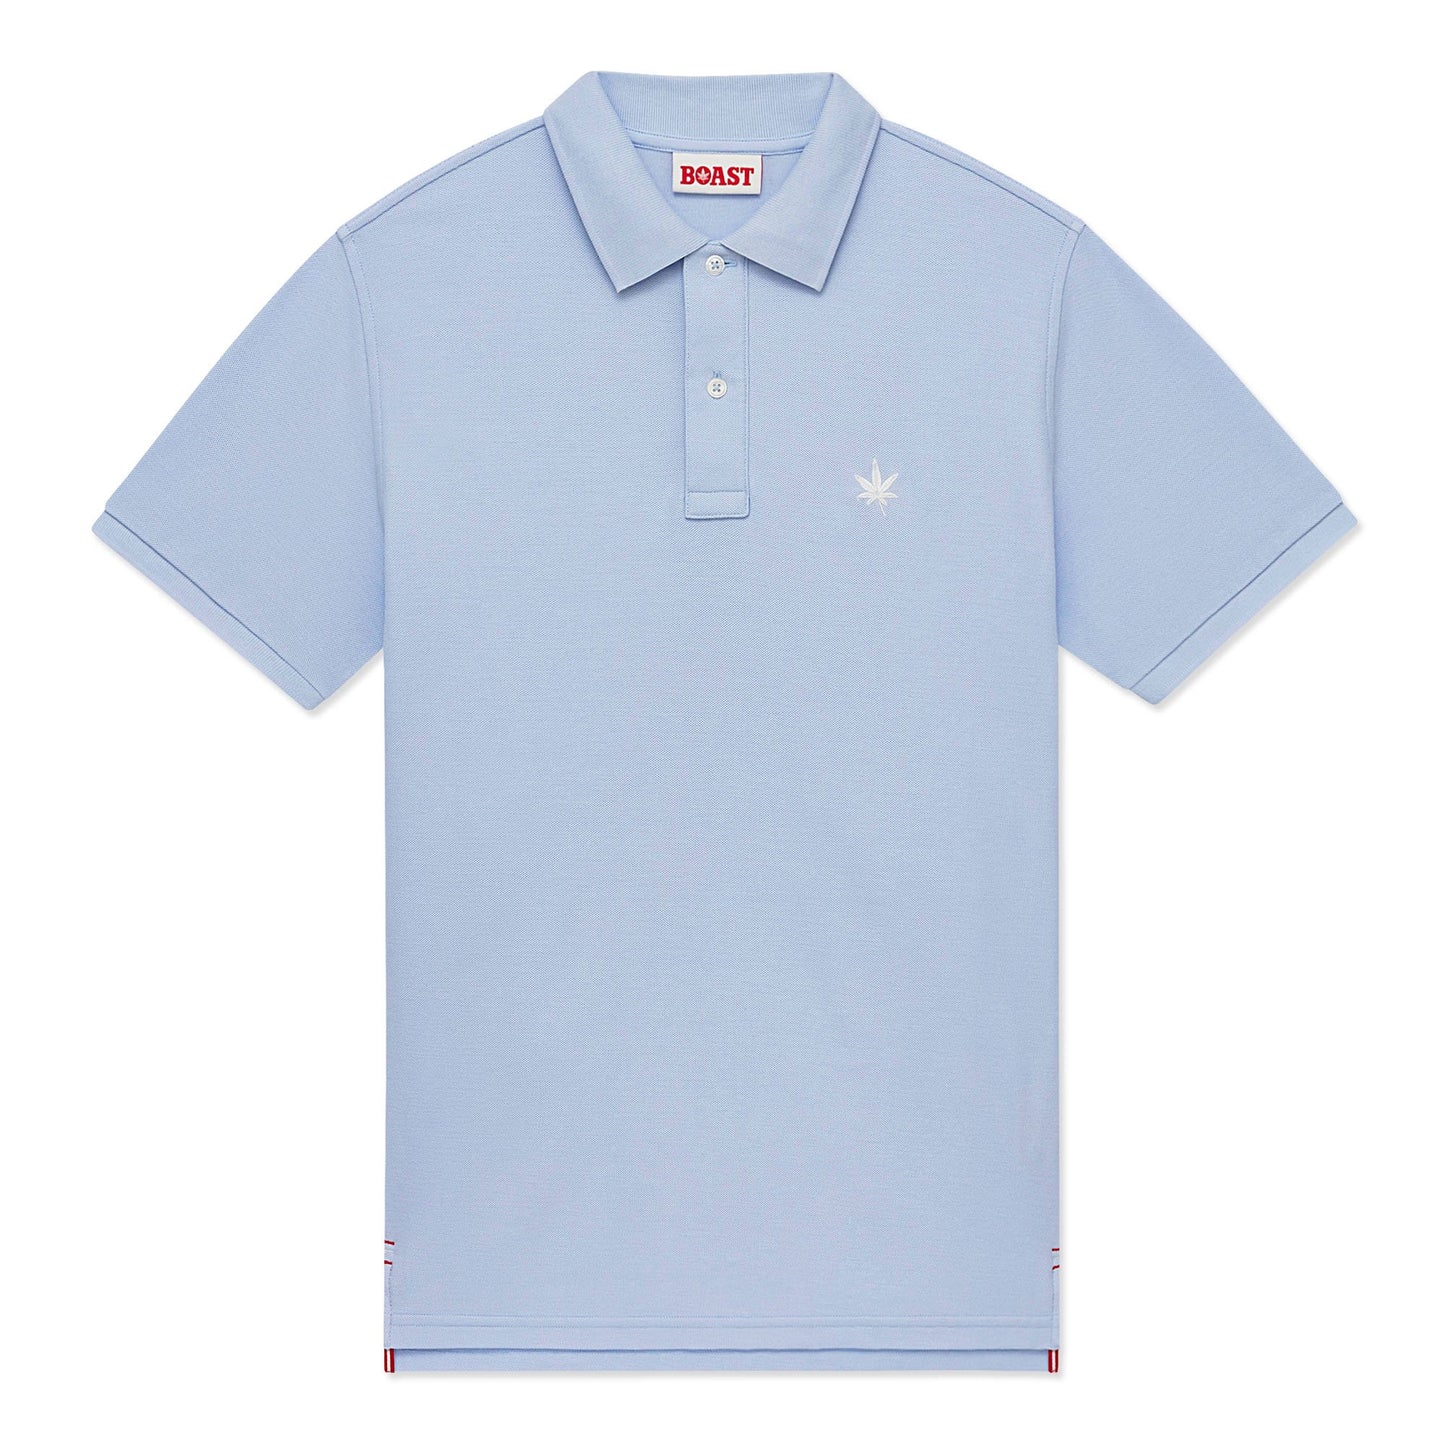 Light blue polo with white embroidered leaf on the left chest.